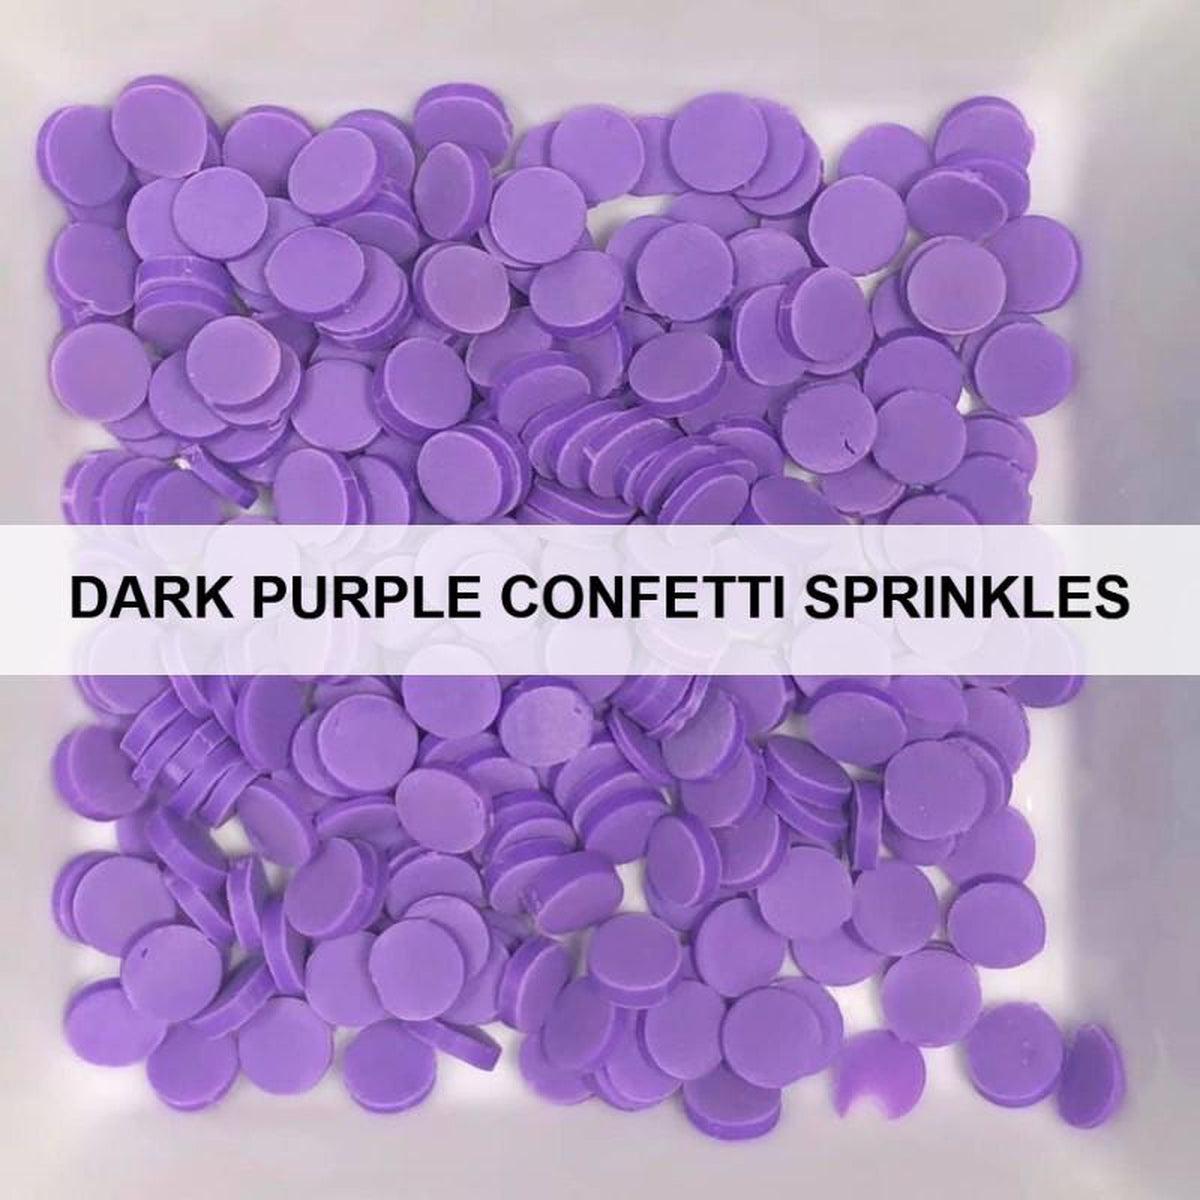 Dark Purple Confetti Sprinkles by Kat Scrappiness - Kat Scrappiness